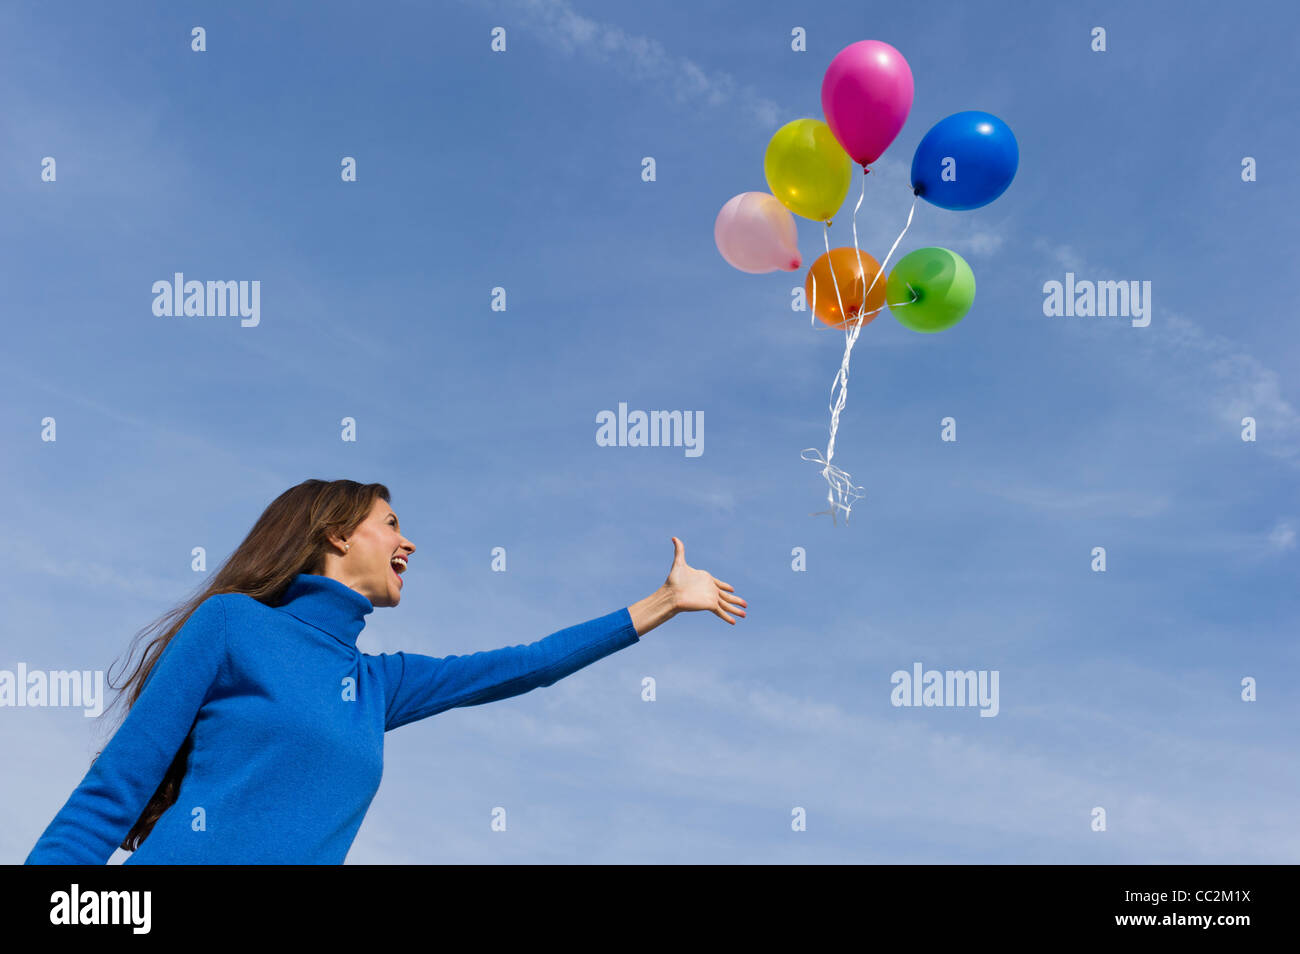 USA, New Jersey, Jersey City, Smiling woman perdre balloons Banque D'Images